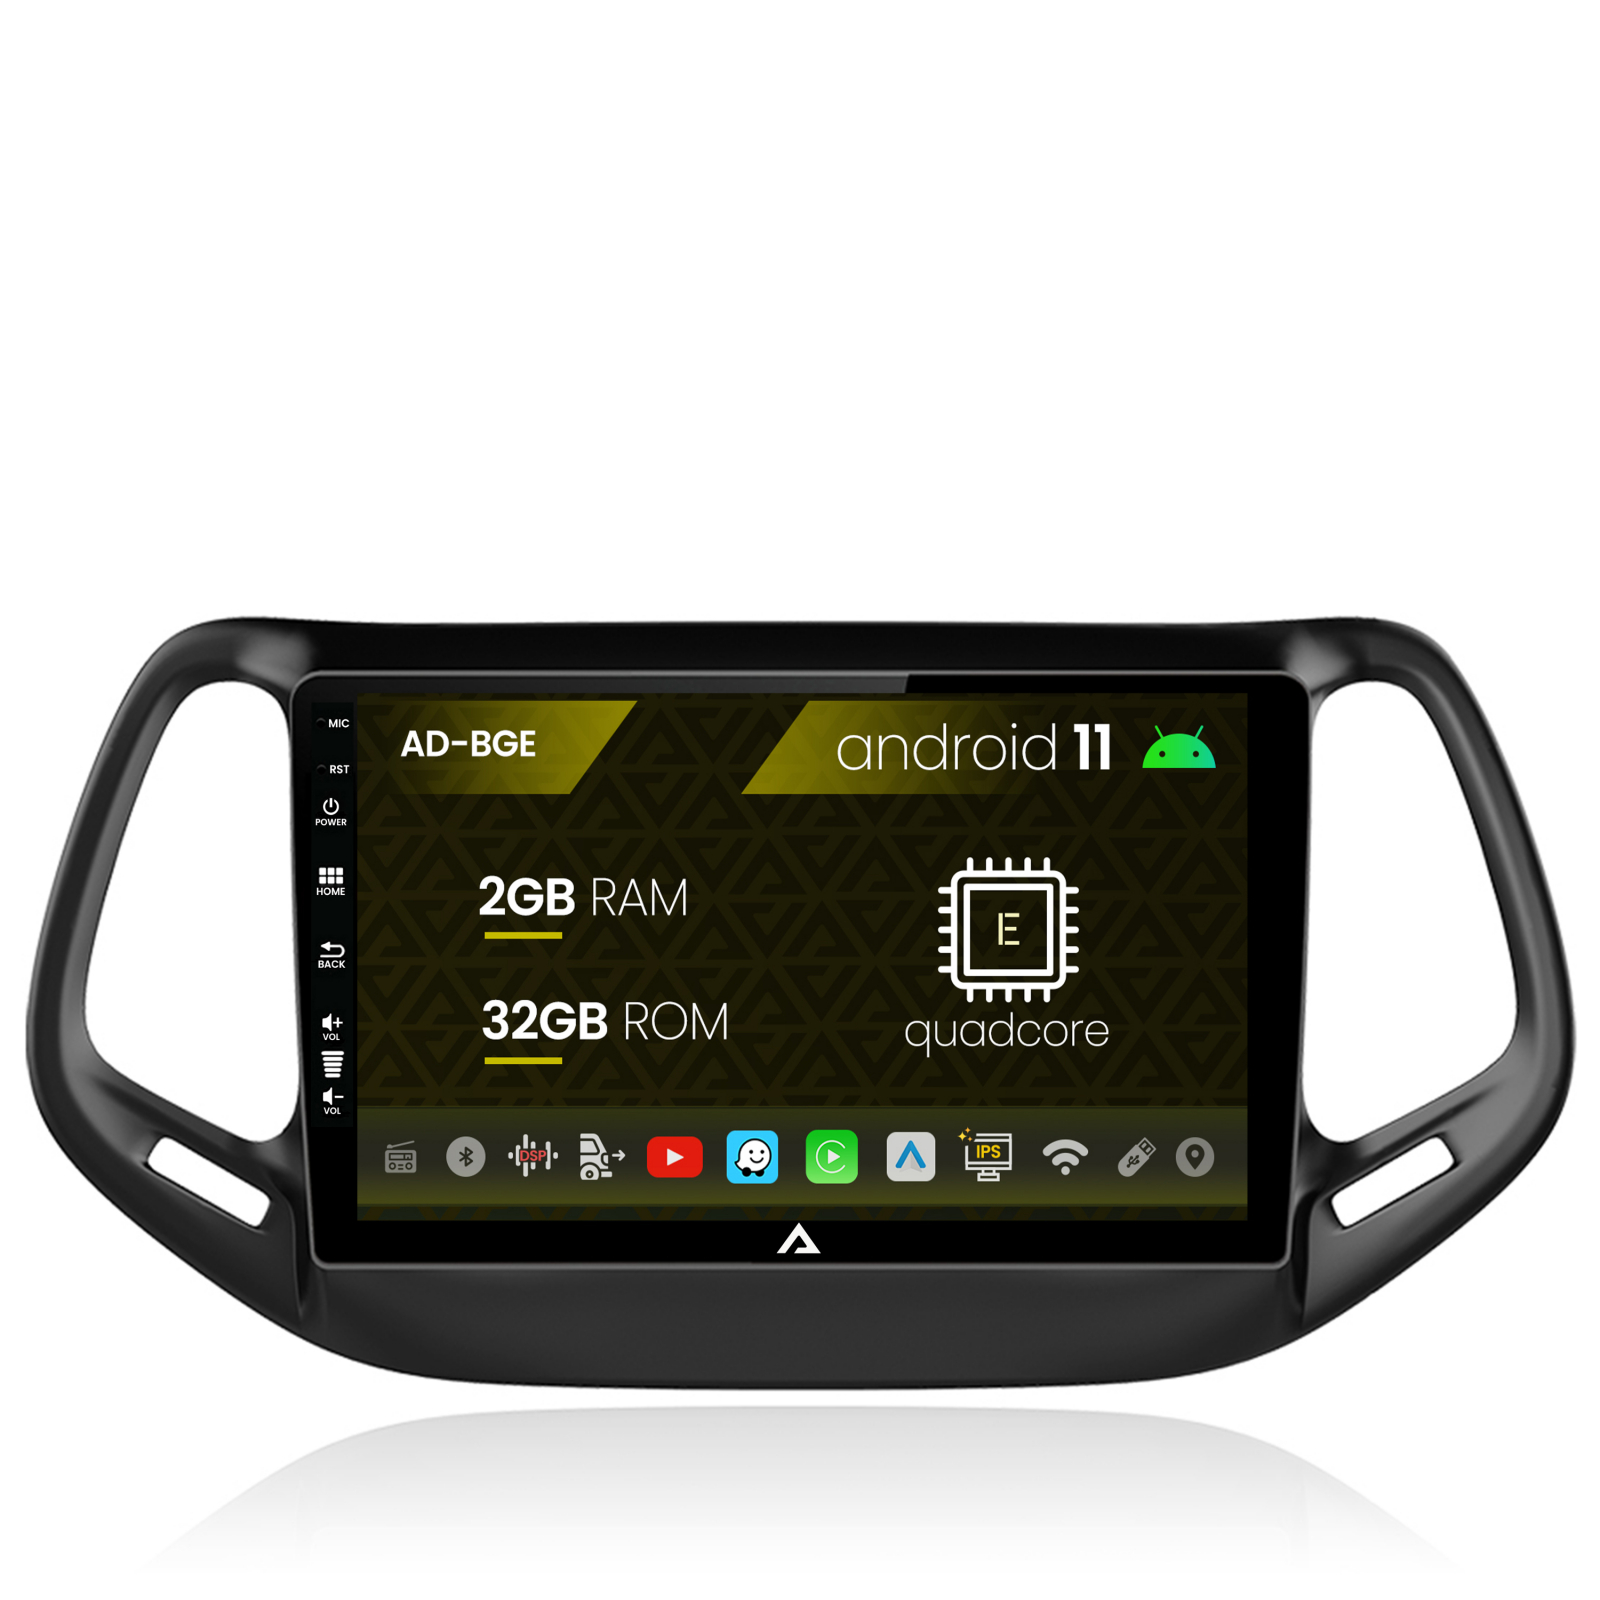 Navigatie Jeep Compass (2016+), Android 11, E-Quadcore / 2GB RAM + 32GB ROM, 9 Inch - AD-BGE9002+AD-BGRKIT287